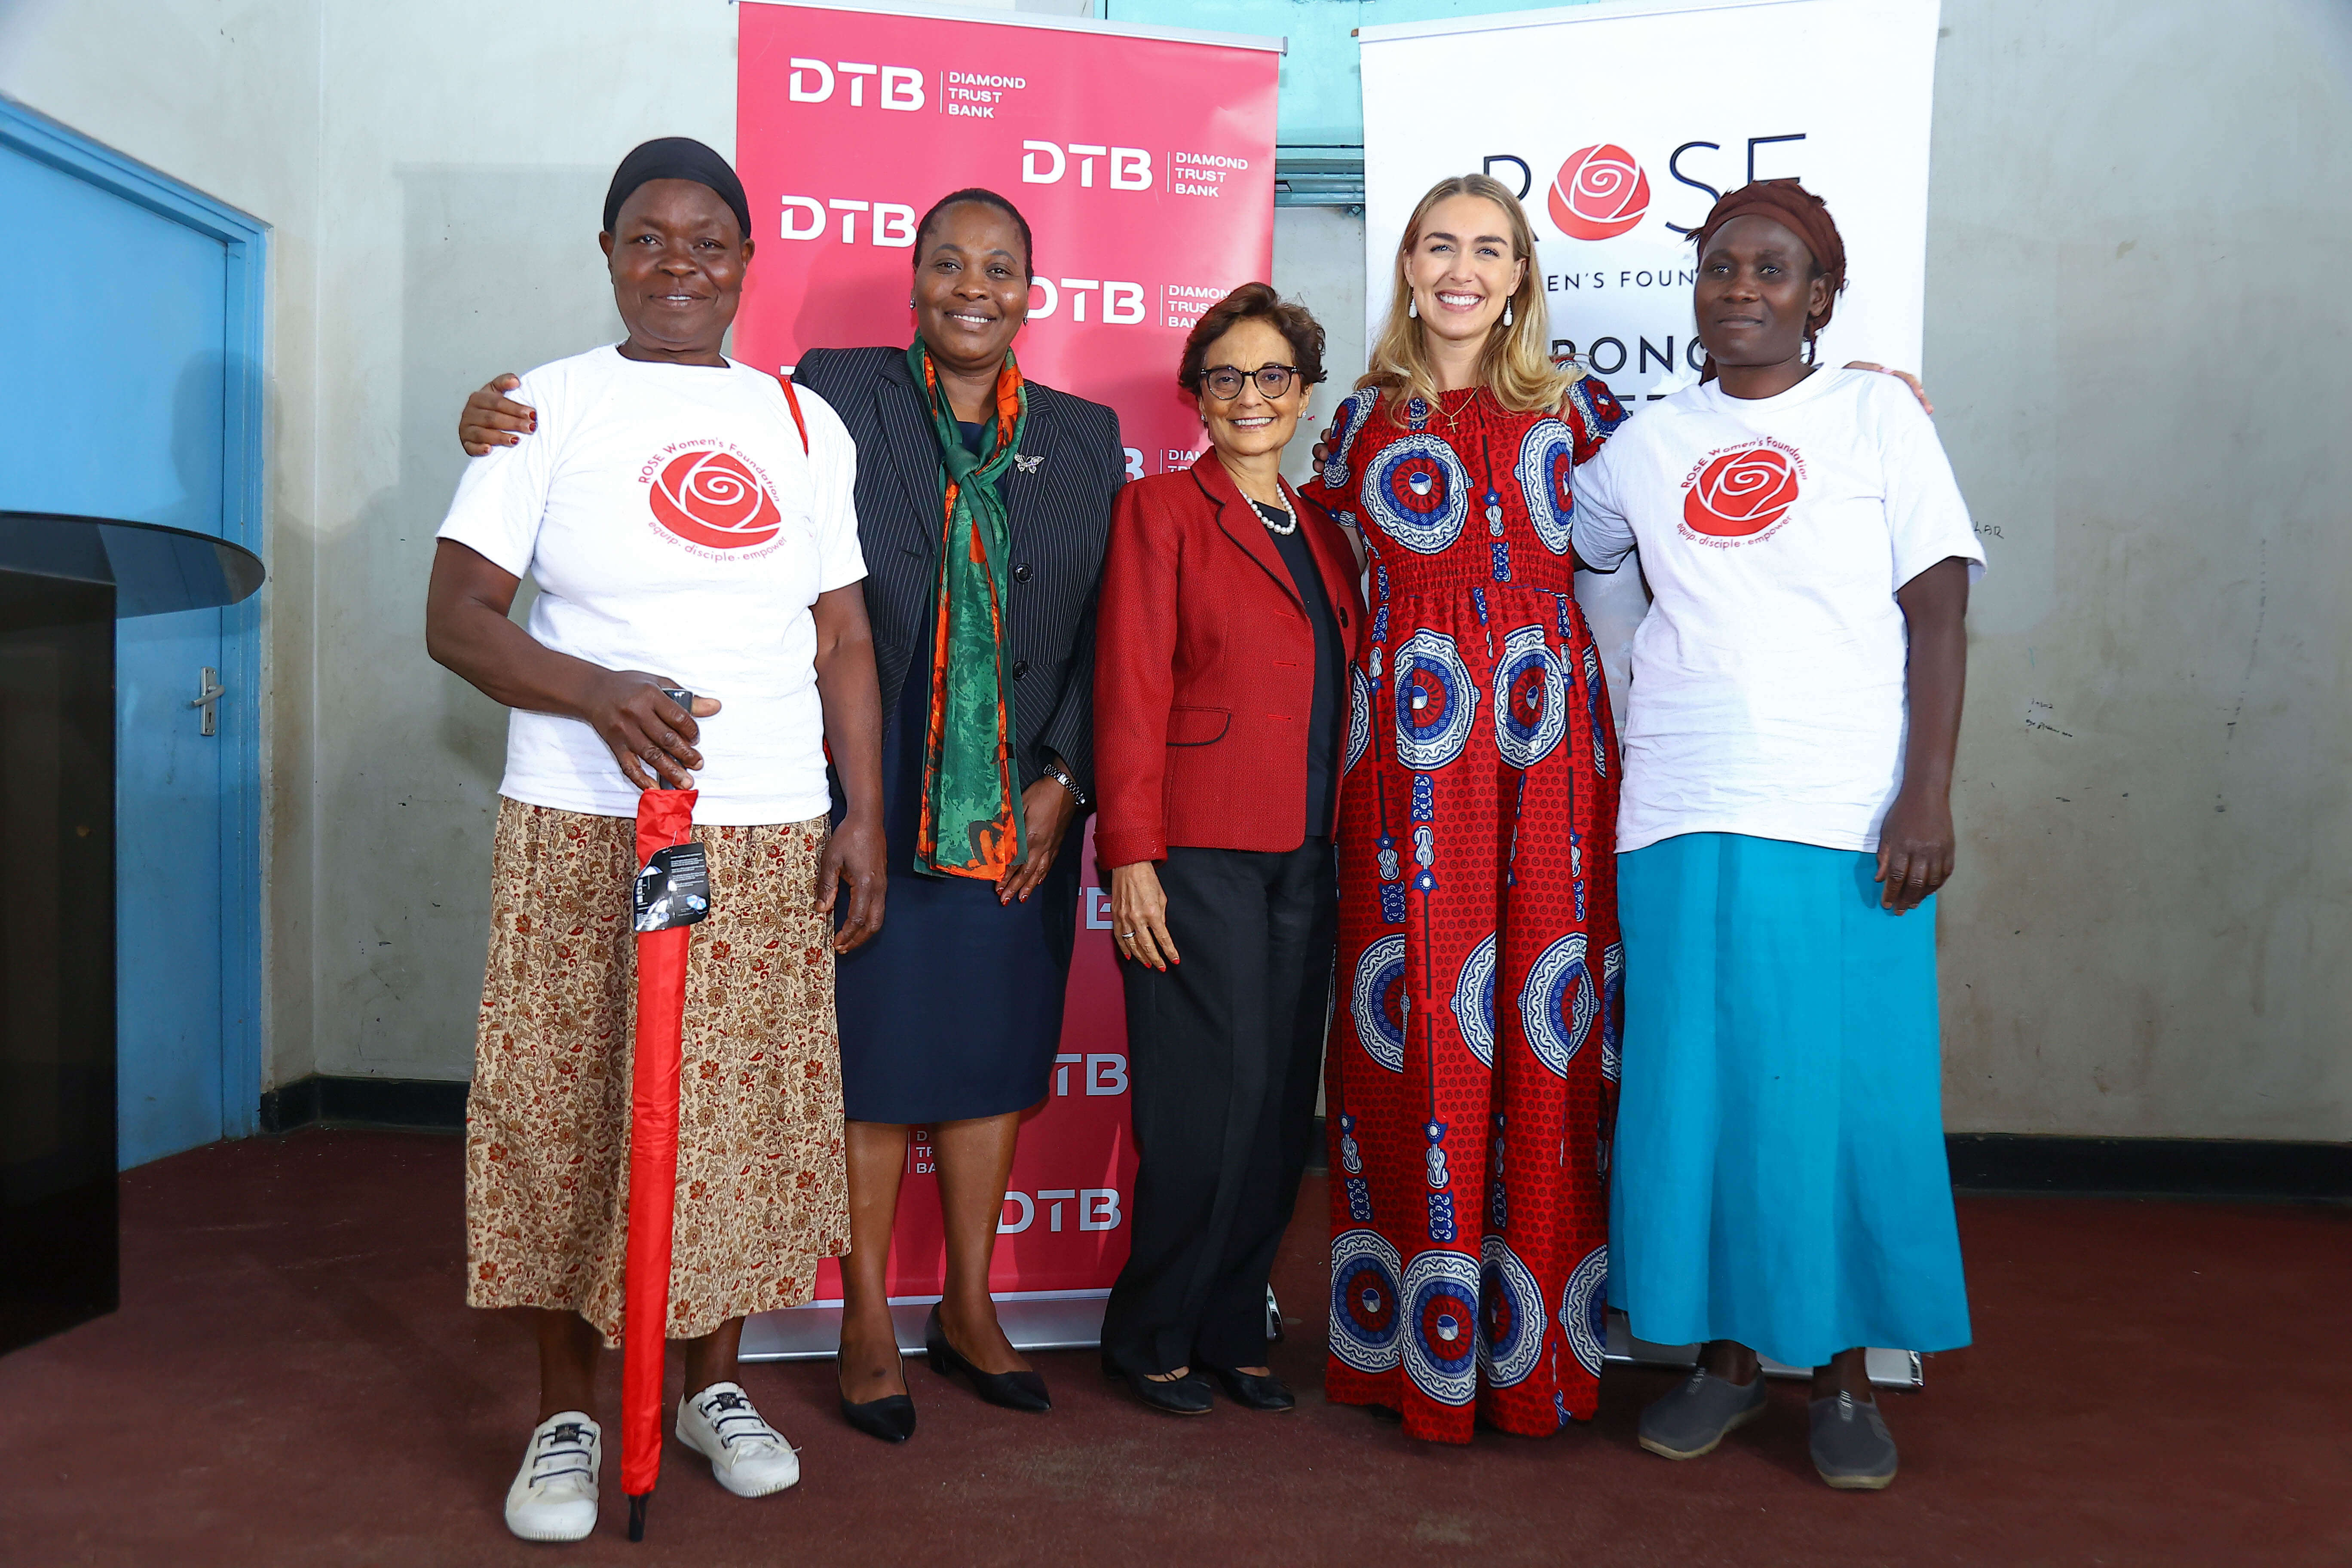 DTB partners with Rose Women’s Foundation to promote financial inclusion